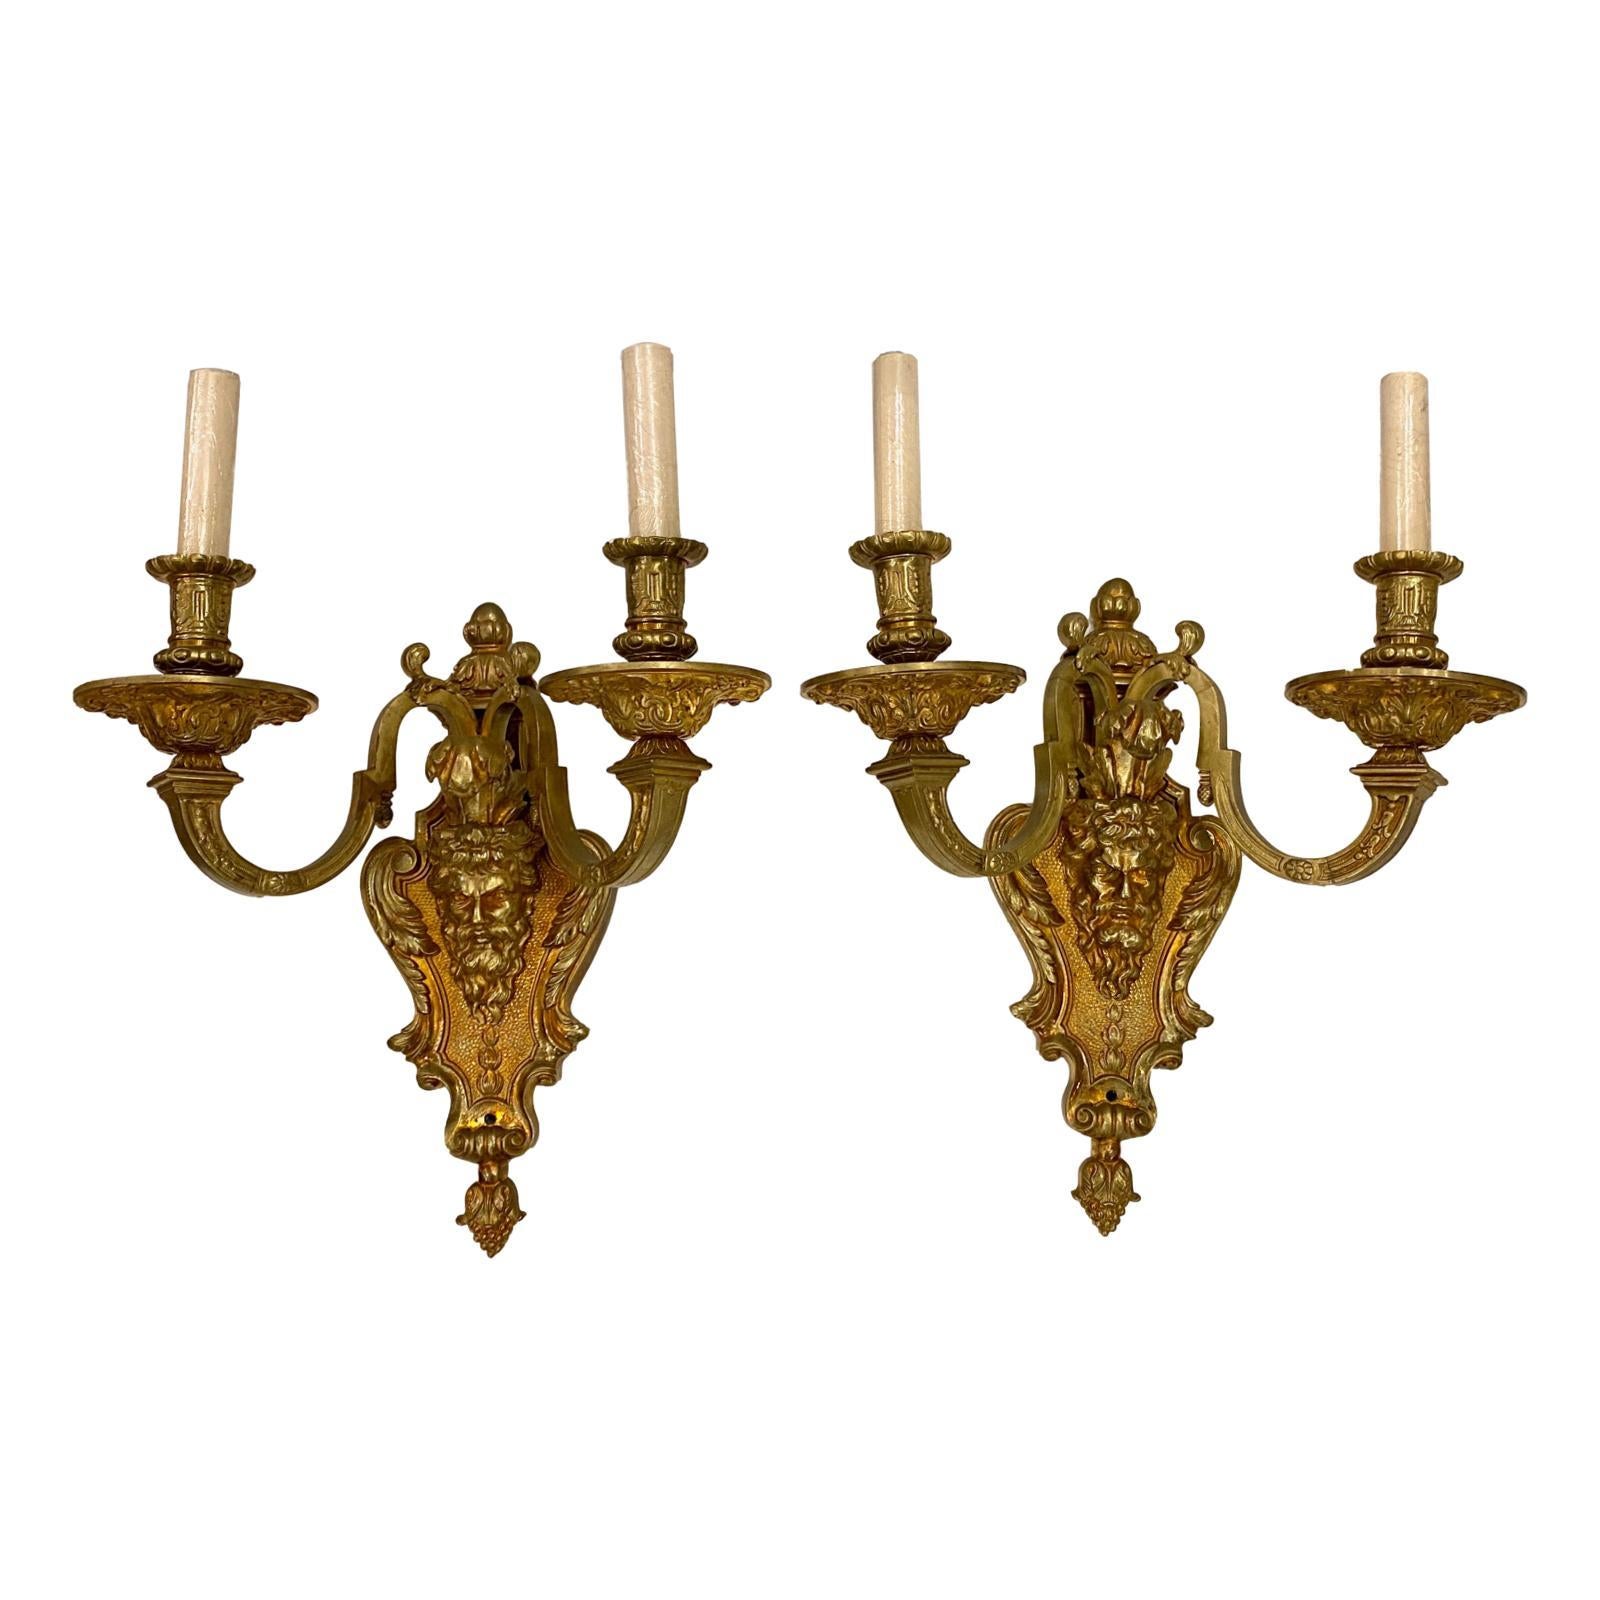 Pair of circa 1920s French gilt bronze sconces with mask details.

Measurements:
Height: 14